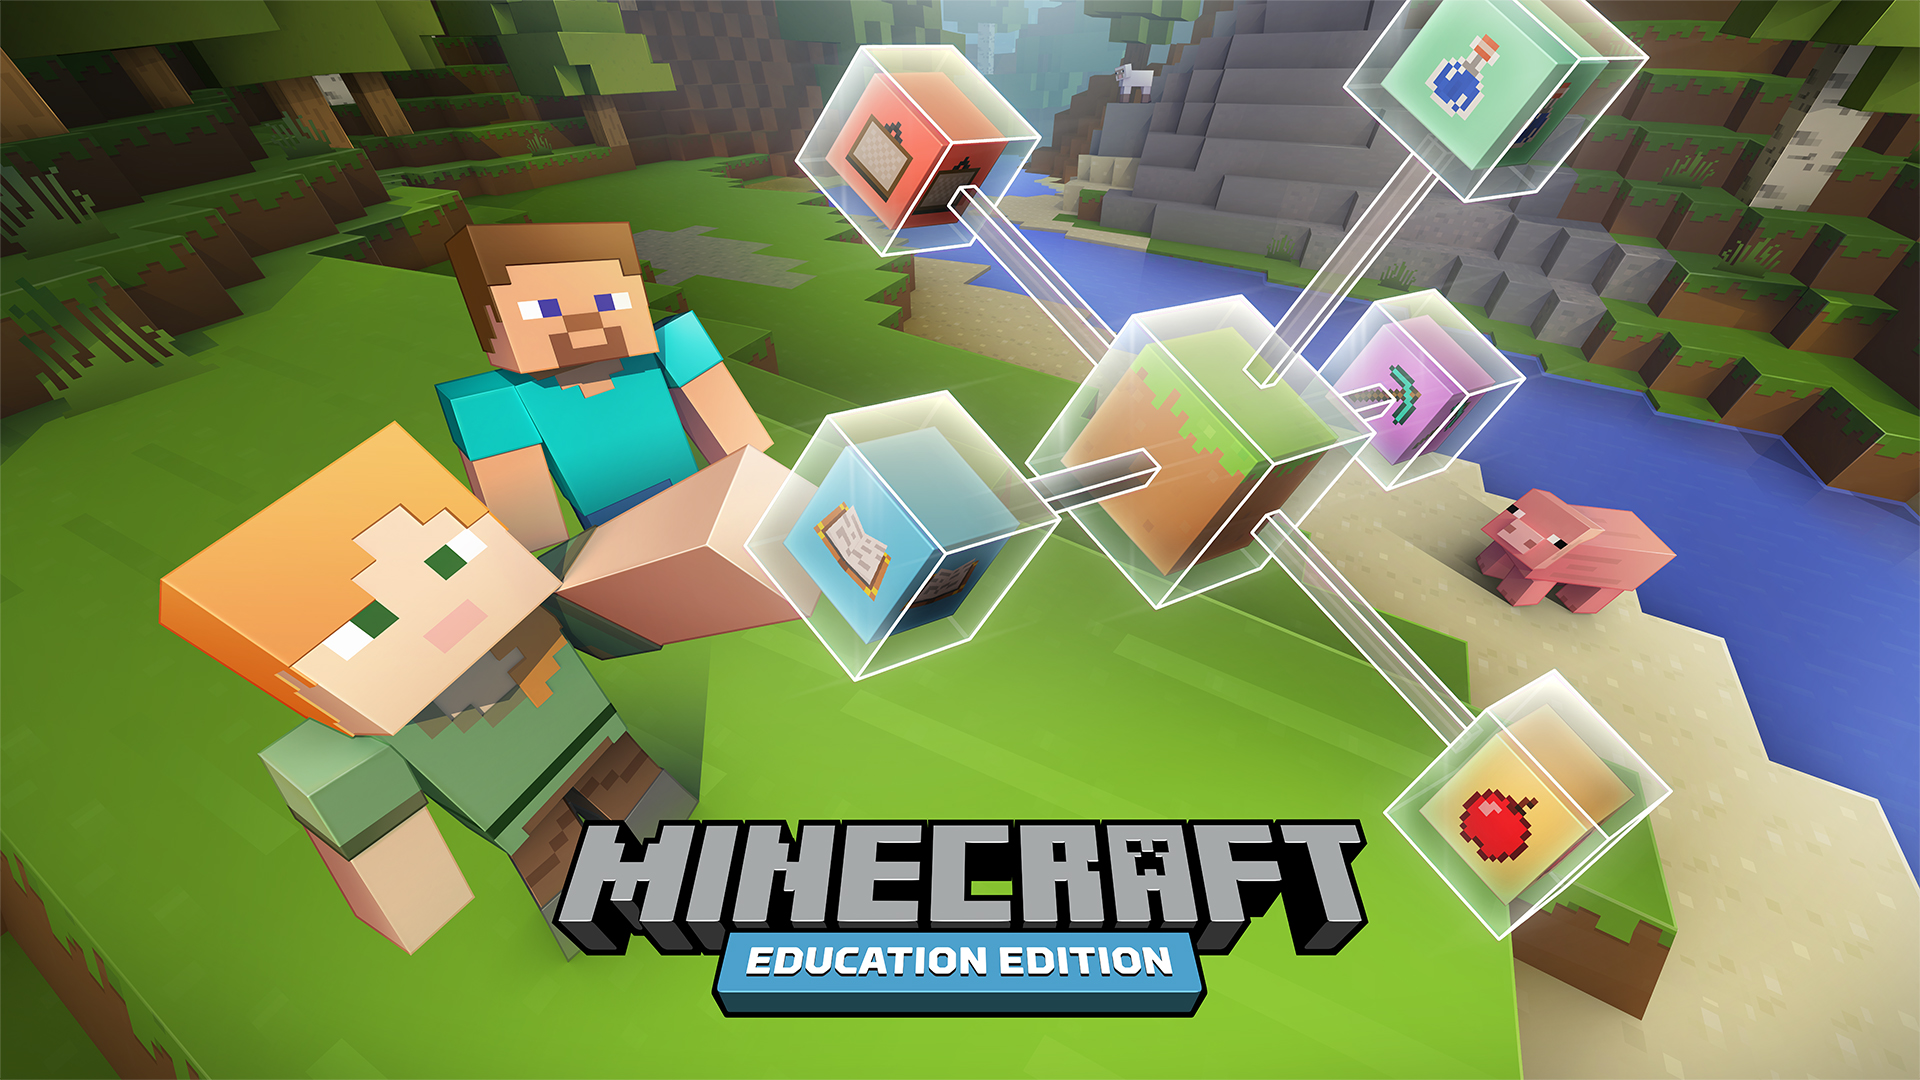 57 Trick Can you buy minecraft education edition at home for Kids